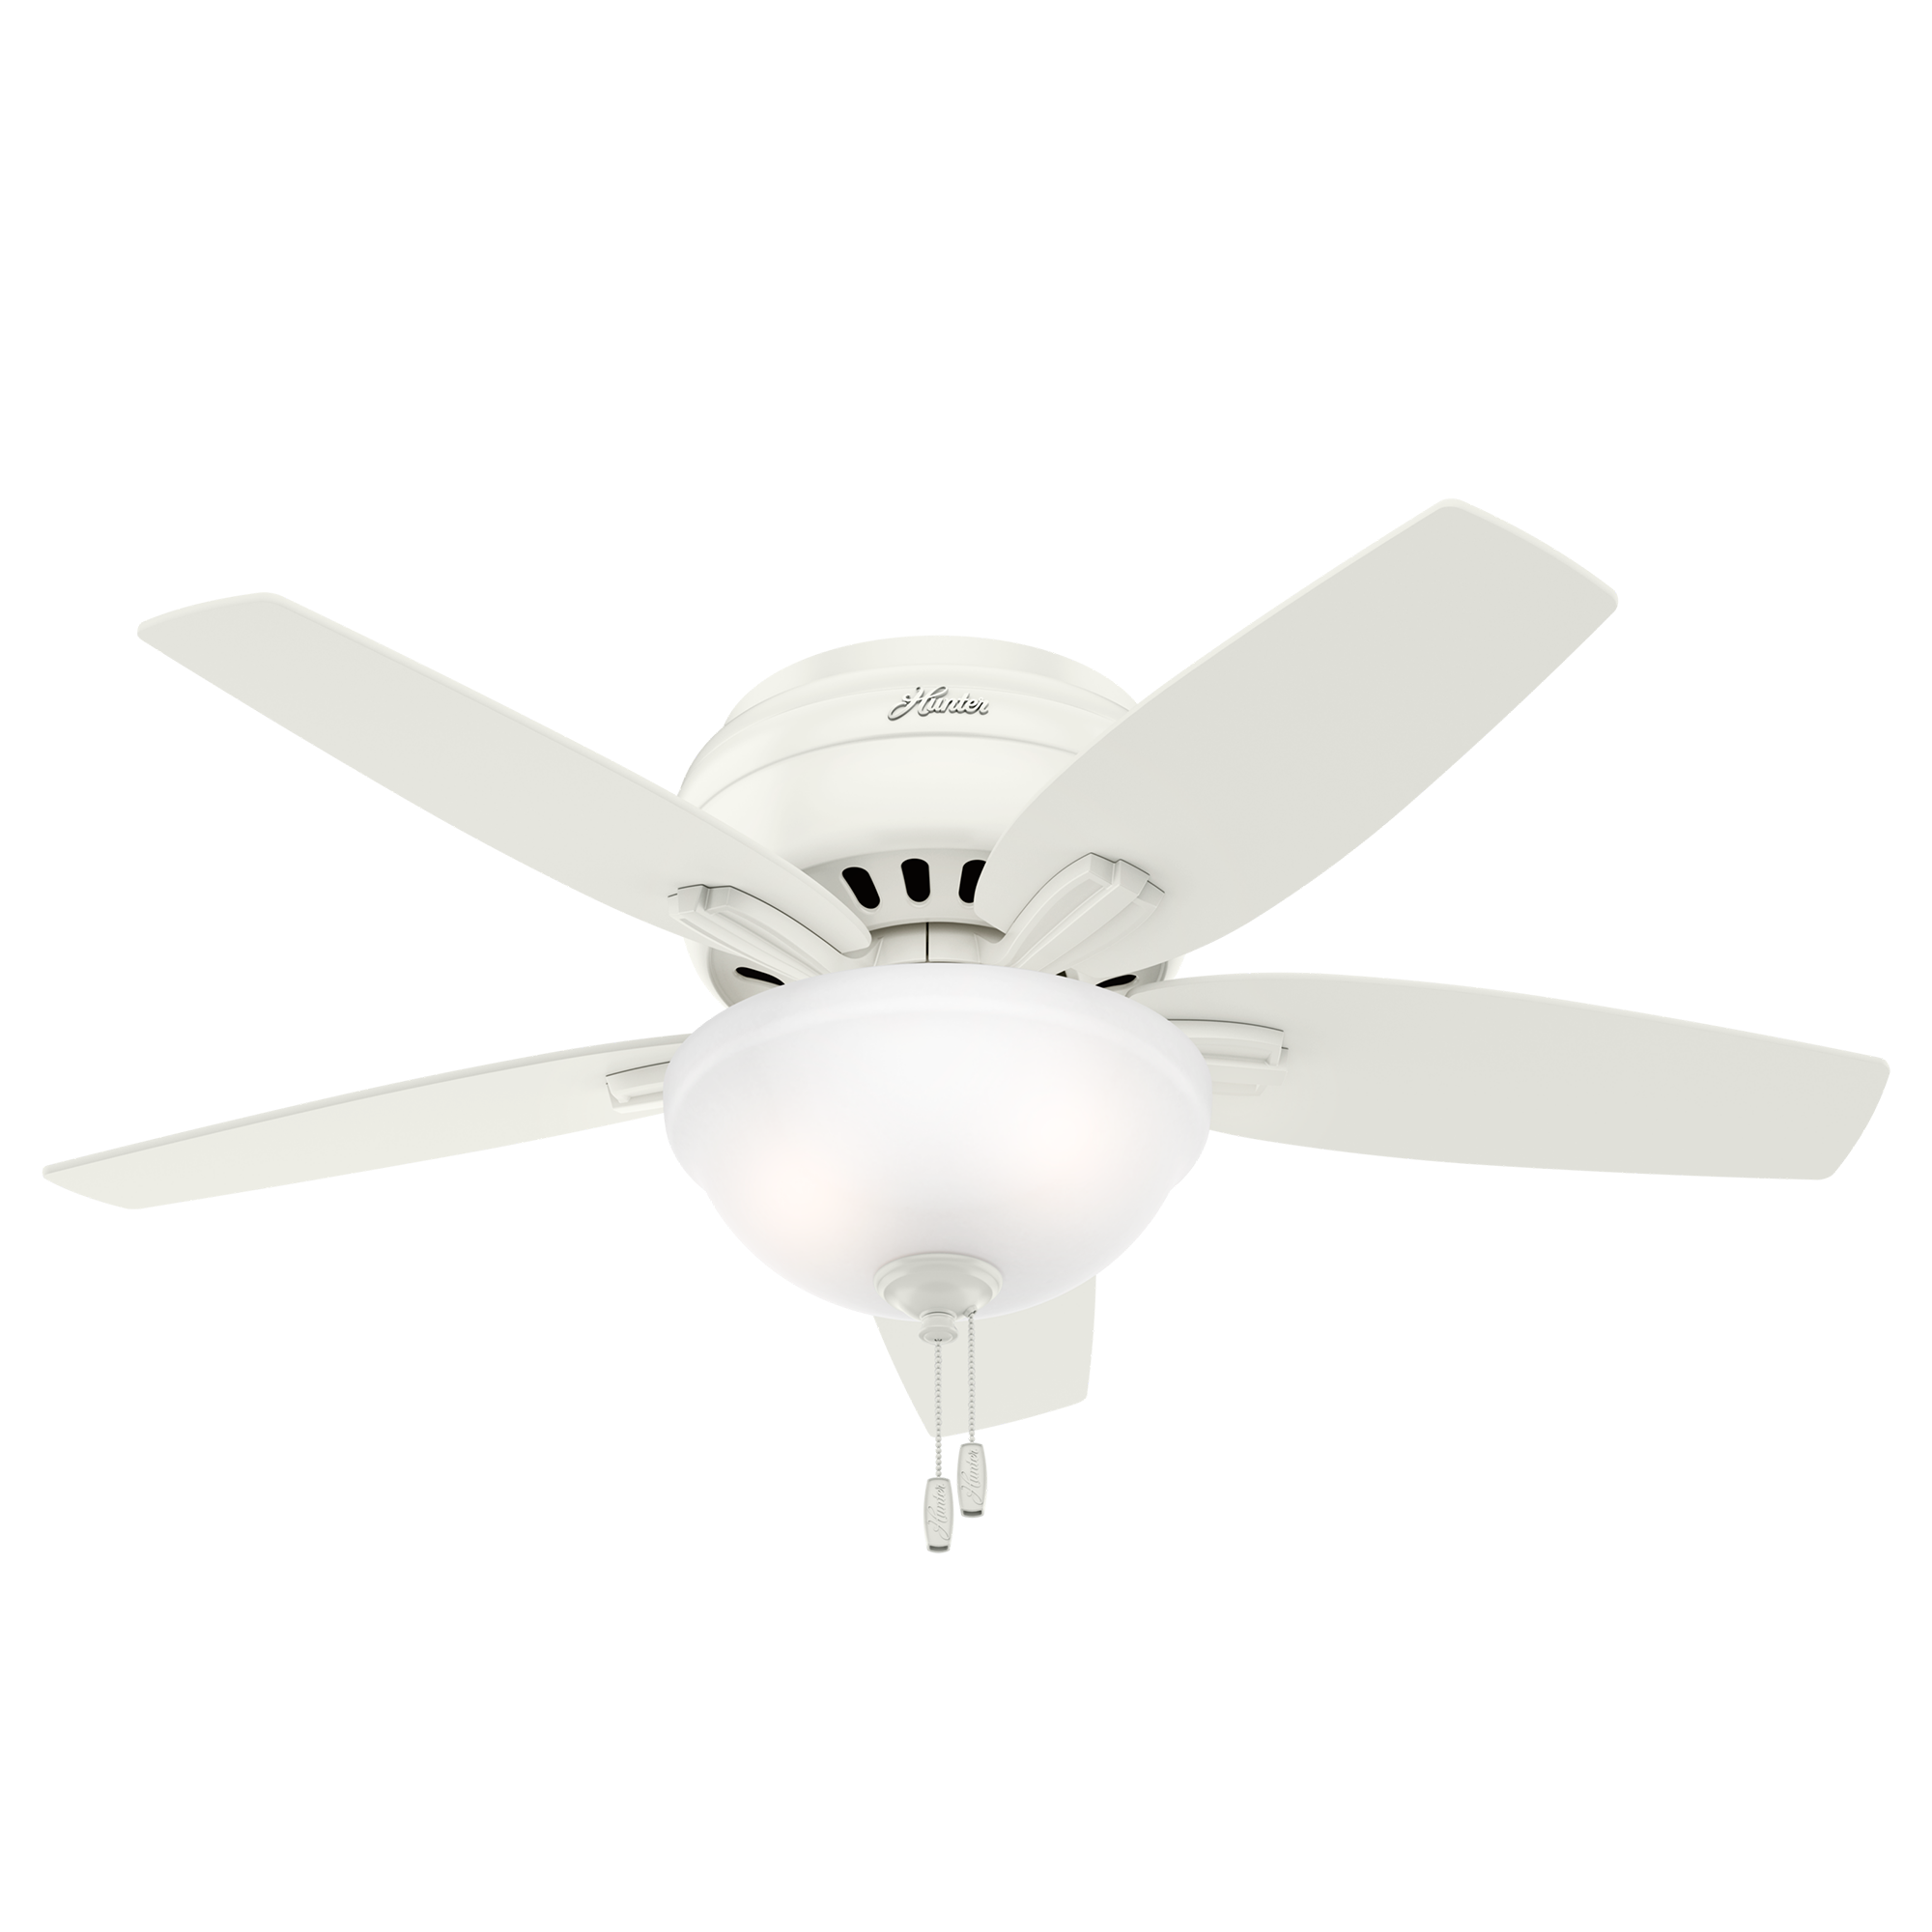 Hunter 42 inch Newsome Low Profile Ceiling Fan with LED Light Kit and Pull Chain Ceiling Fan Hunter   